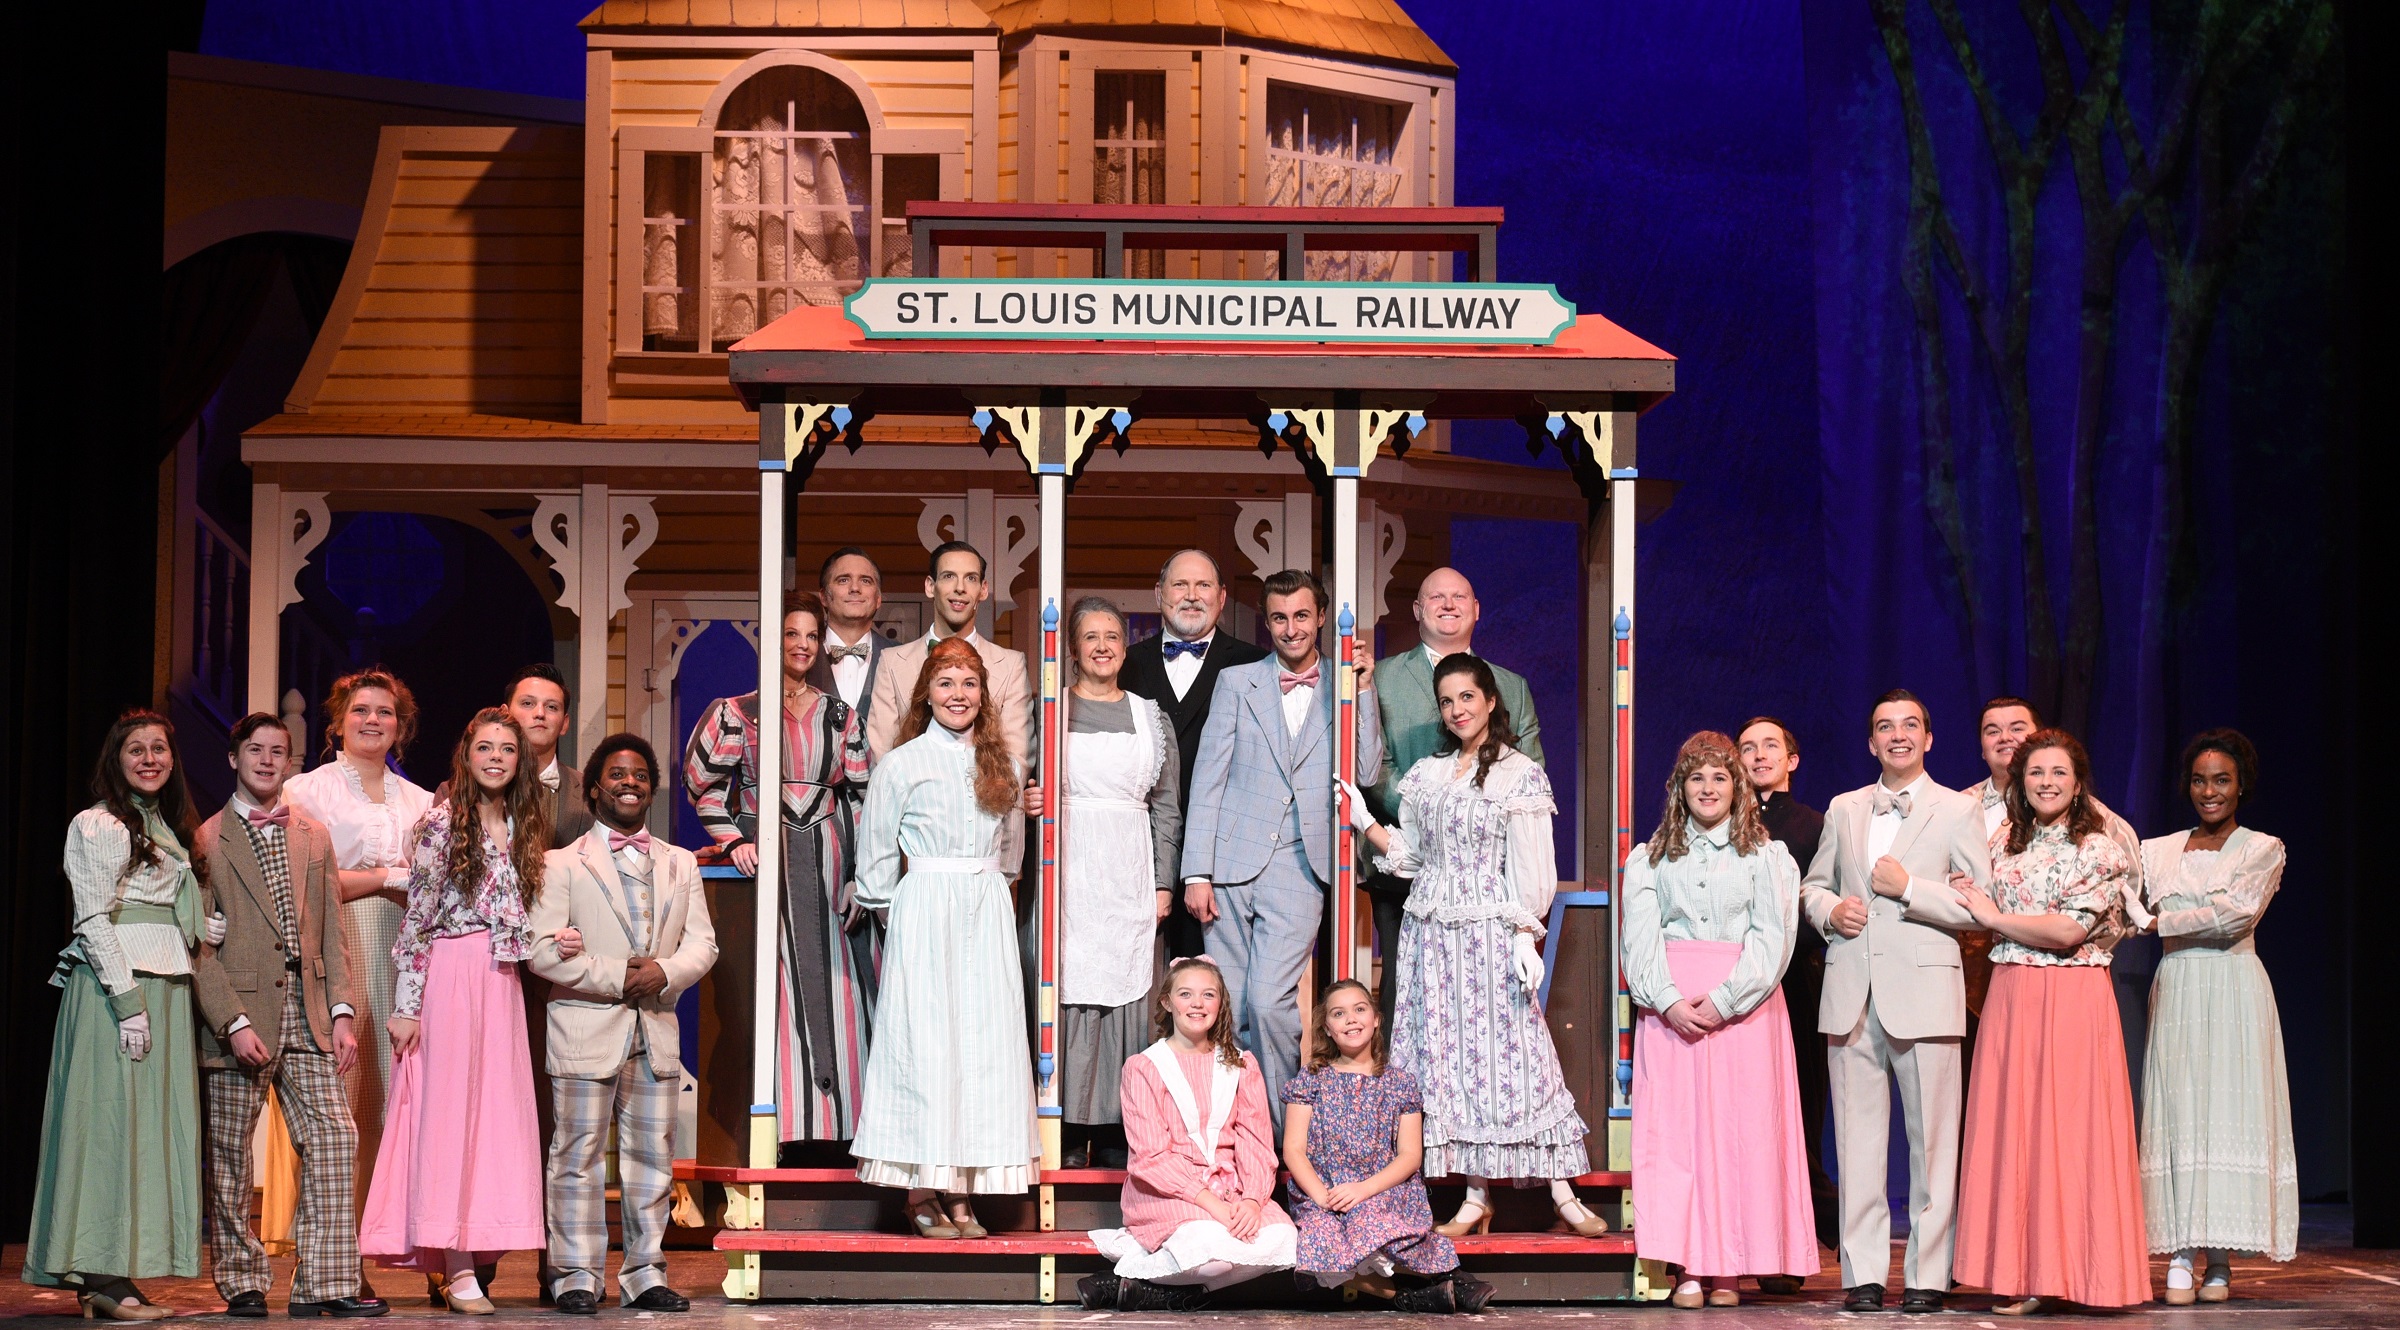 Check out the reviews of “Meet Me in St. Louis” …